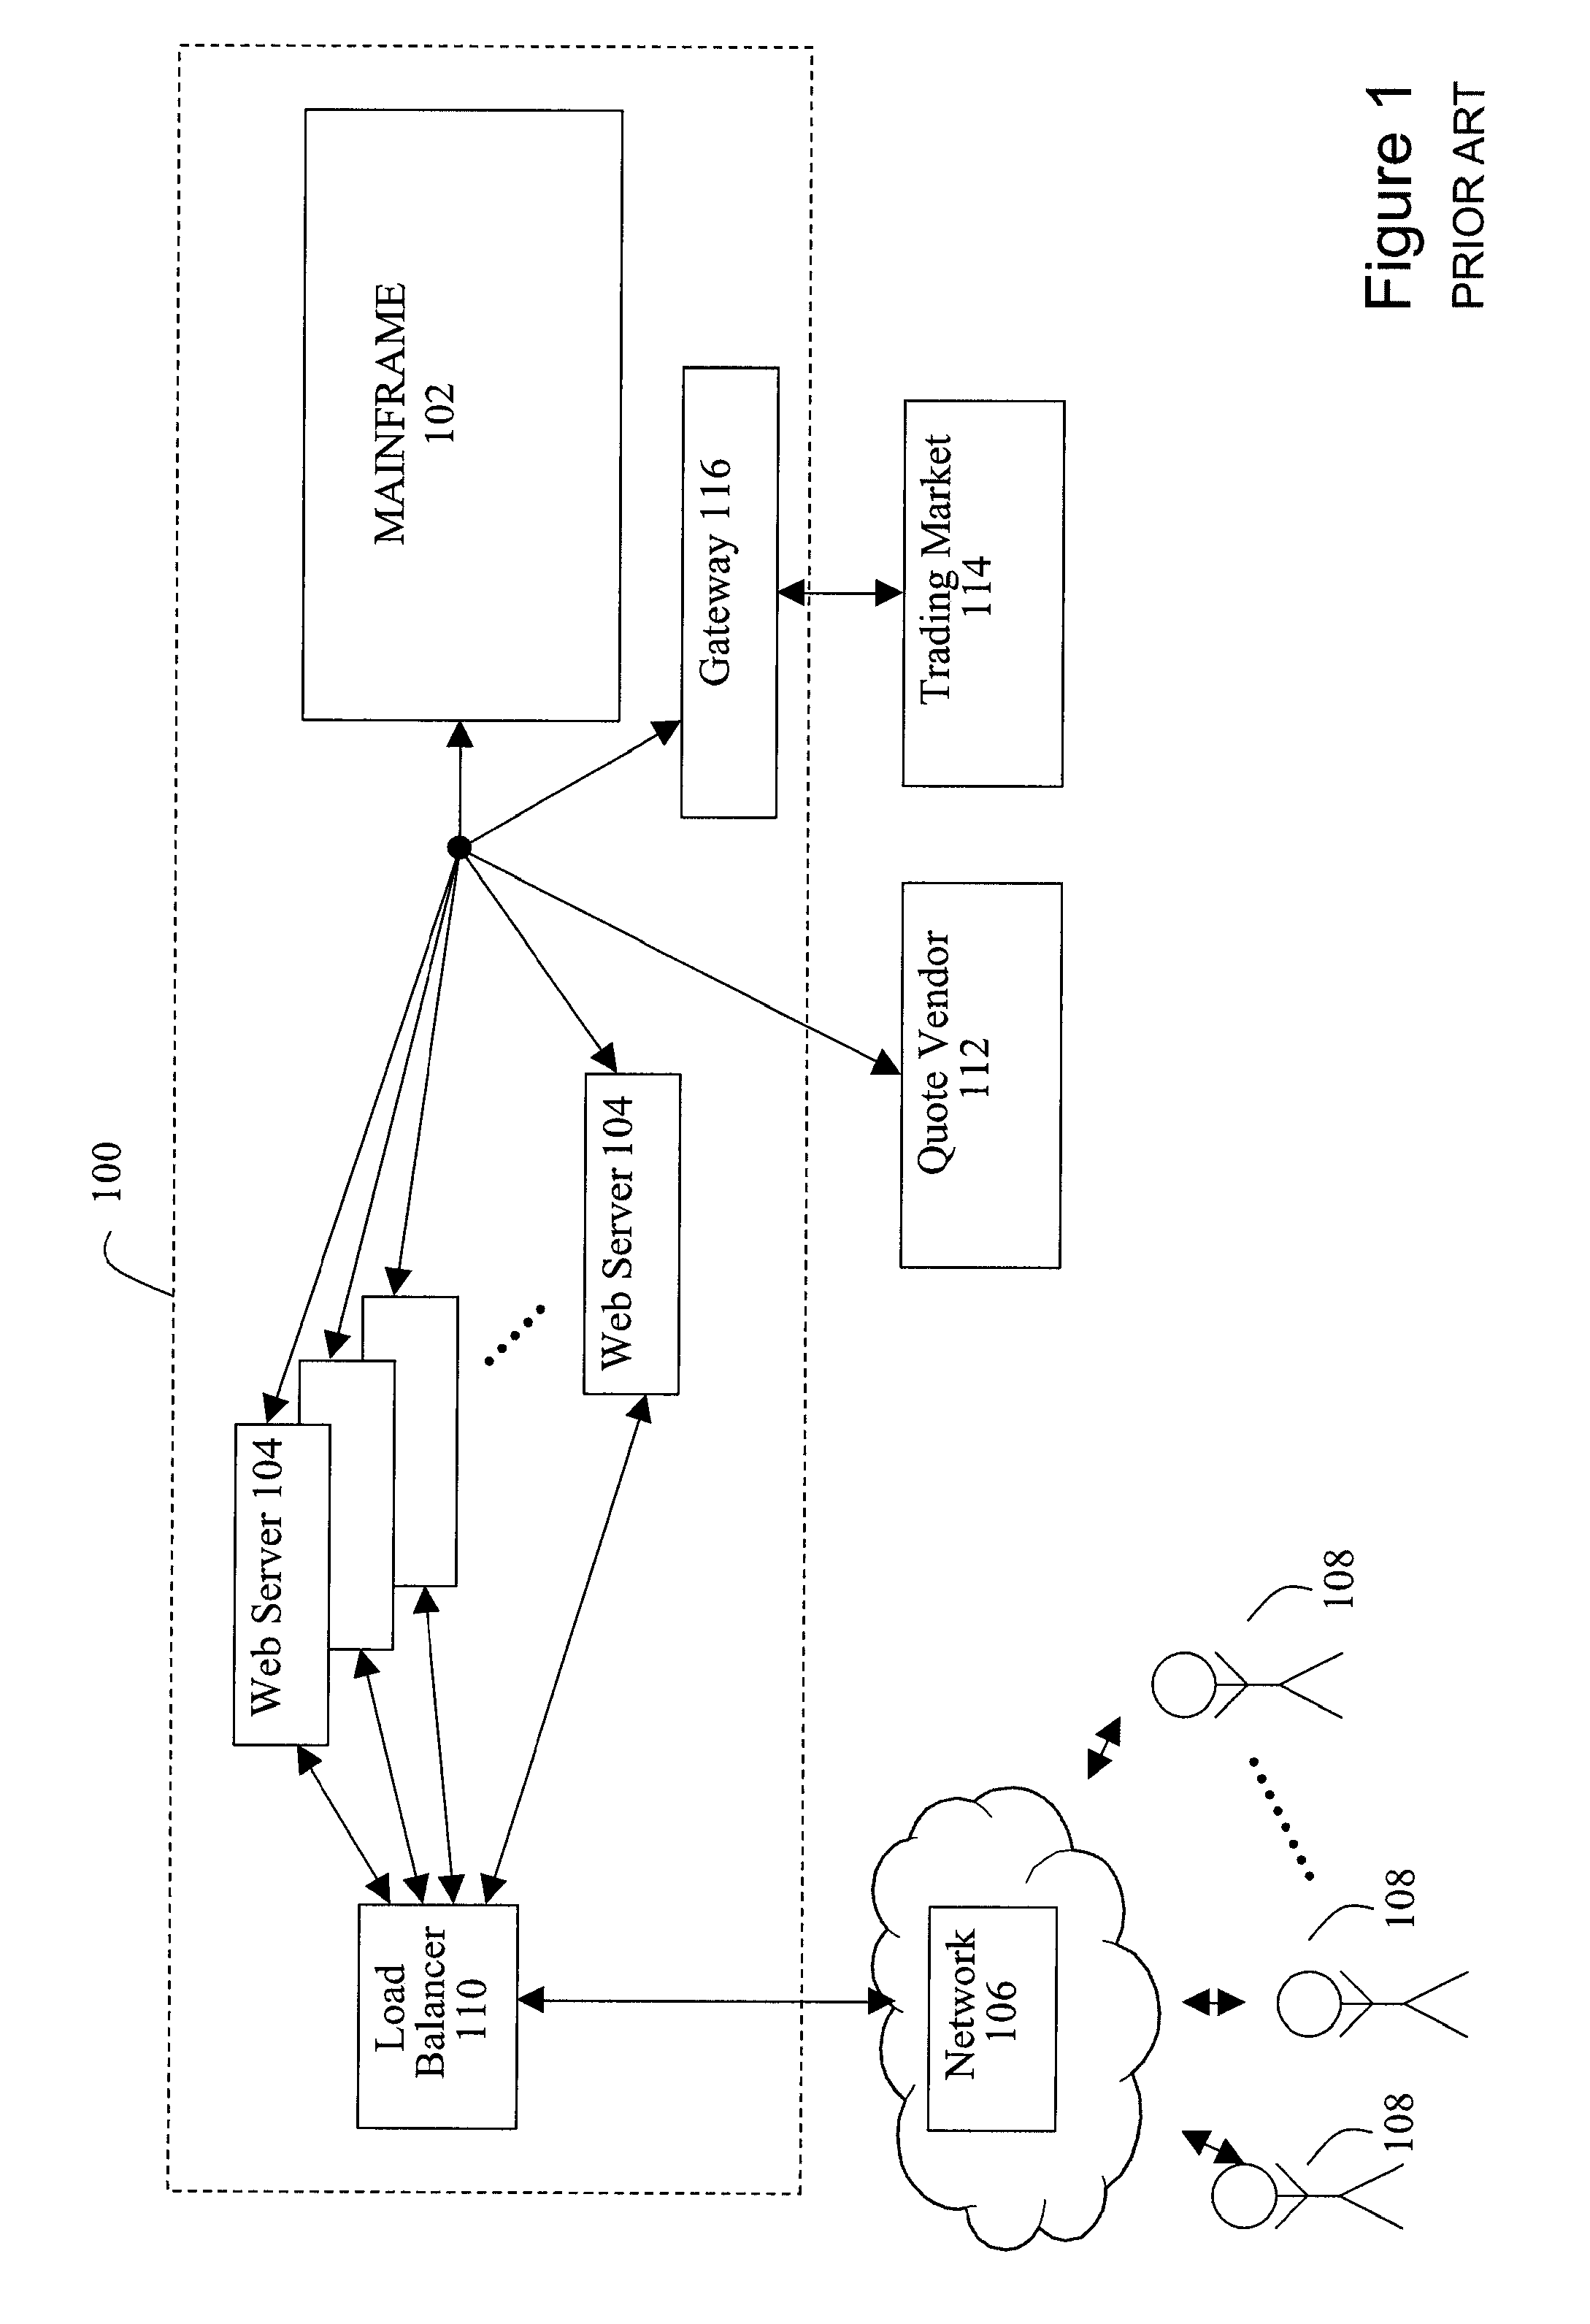 System and Method for the Automated Brokerage of Financial Instruments